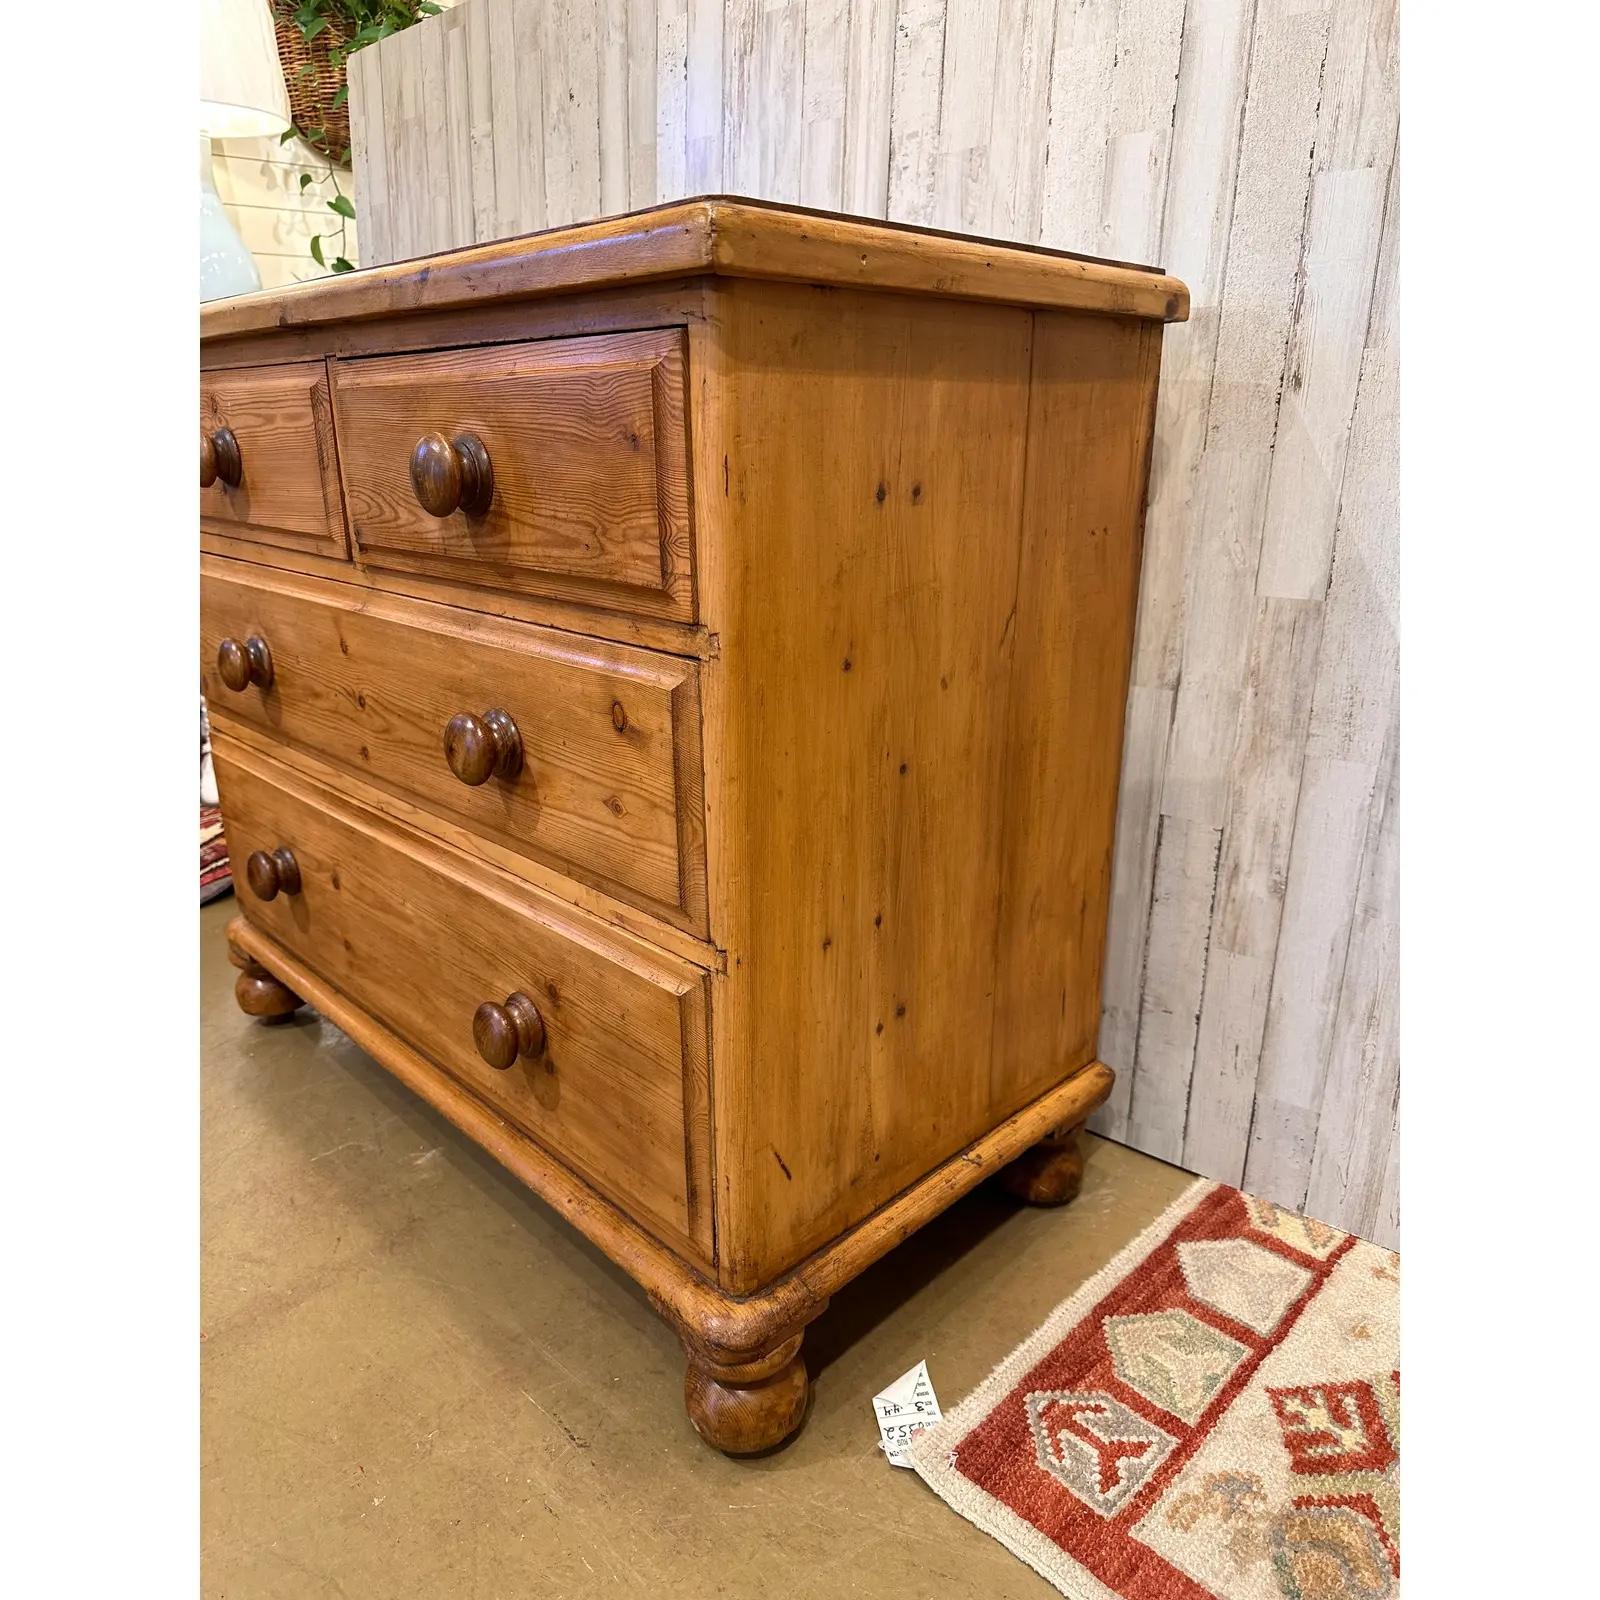 This is a lovely antique pine chest! This piece dates to the 19th century and has lovely patina. The wood has a warm glow, that is accented perfectly by the darker stained knobs. Being a two over two design with a casual simple feel. This chest